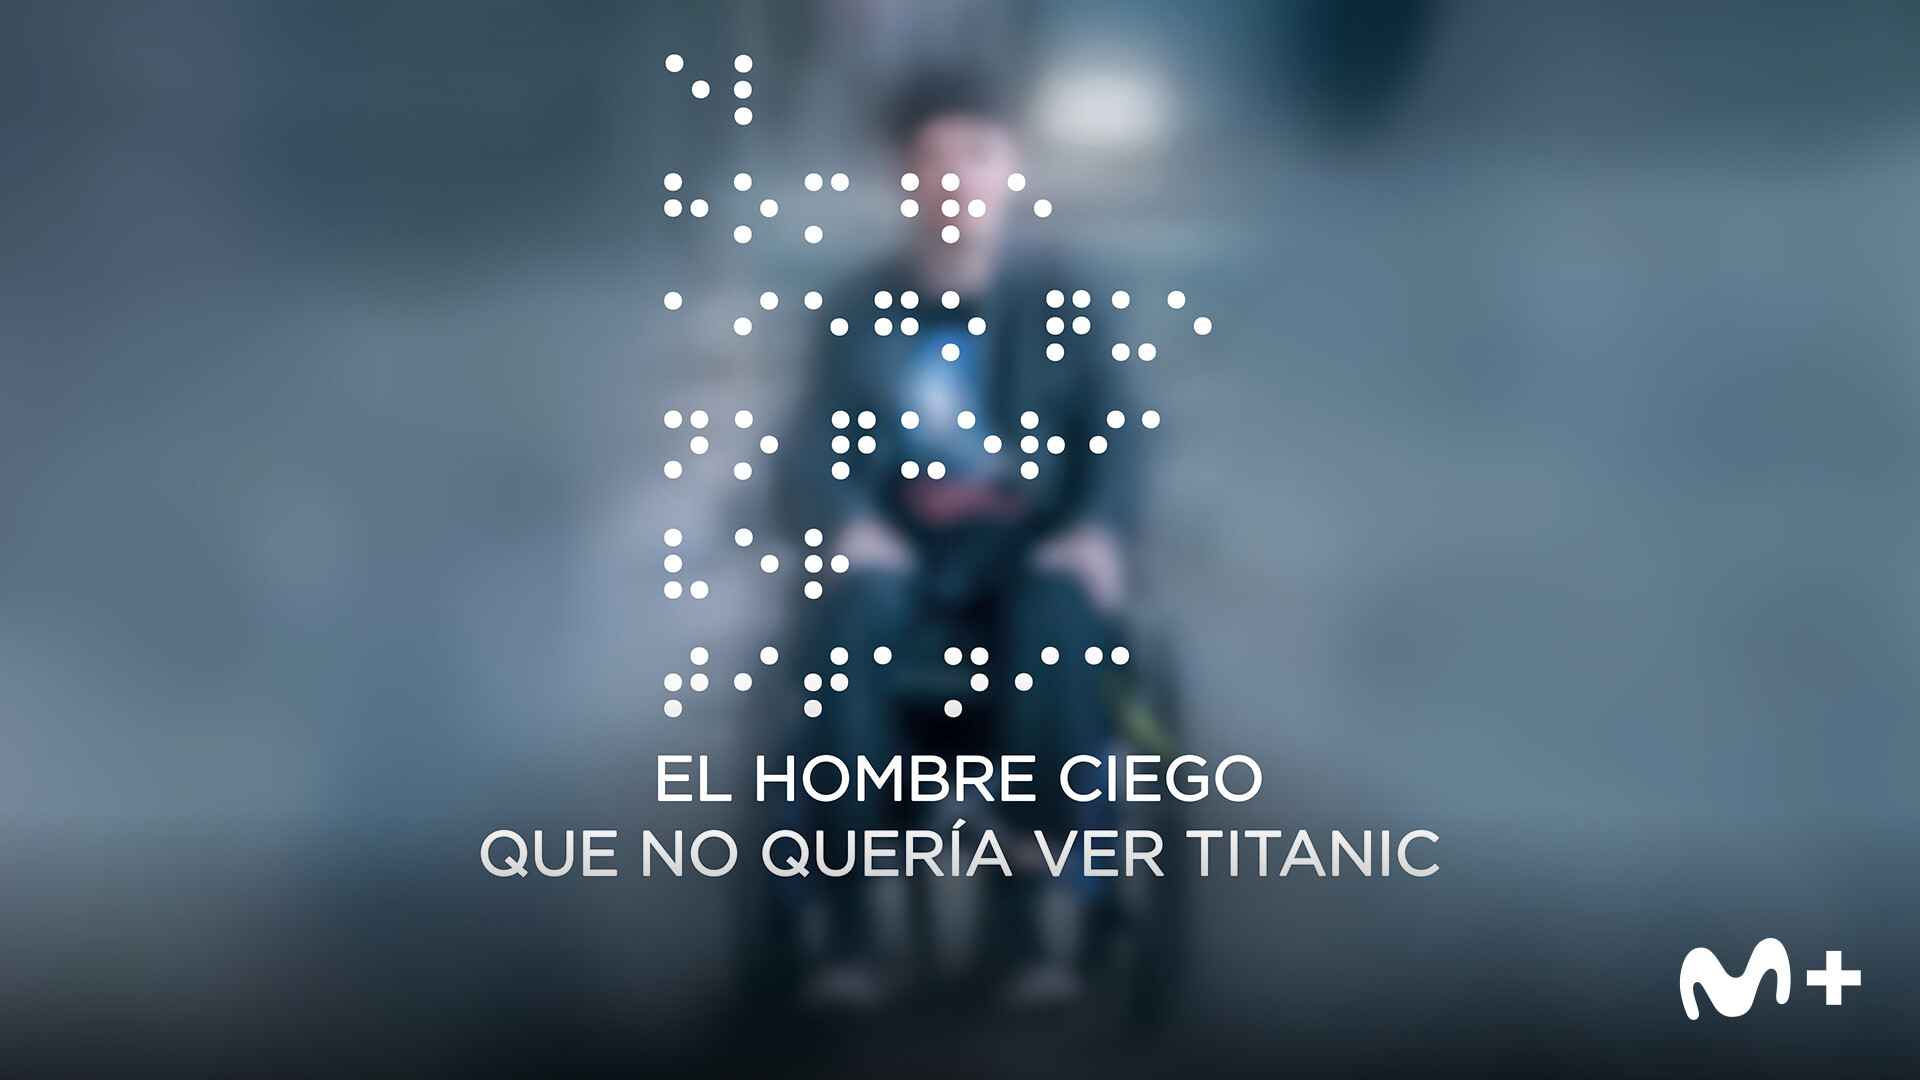 blind-who-didn't-want-to-see-titanic-movistar-plus-2.jpeg